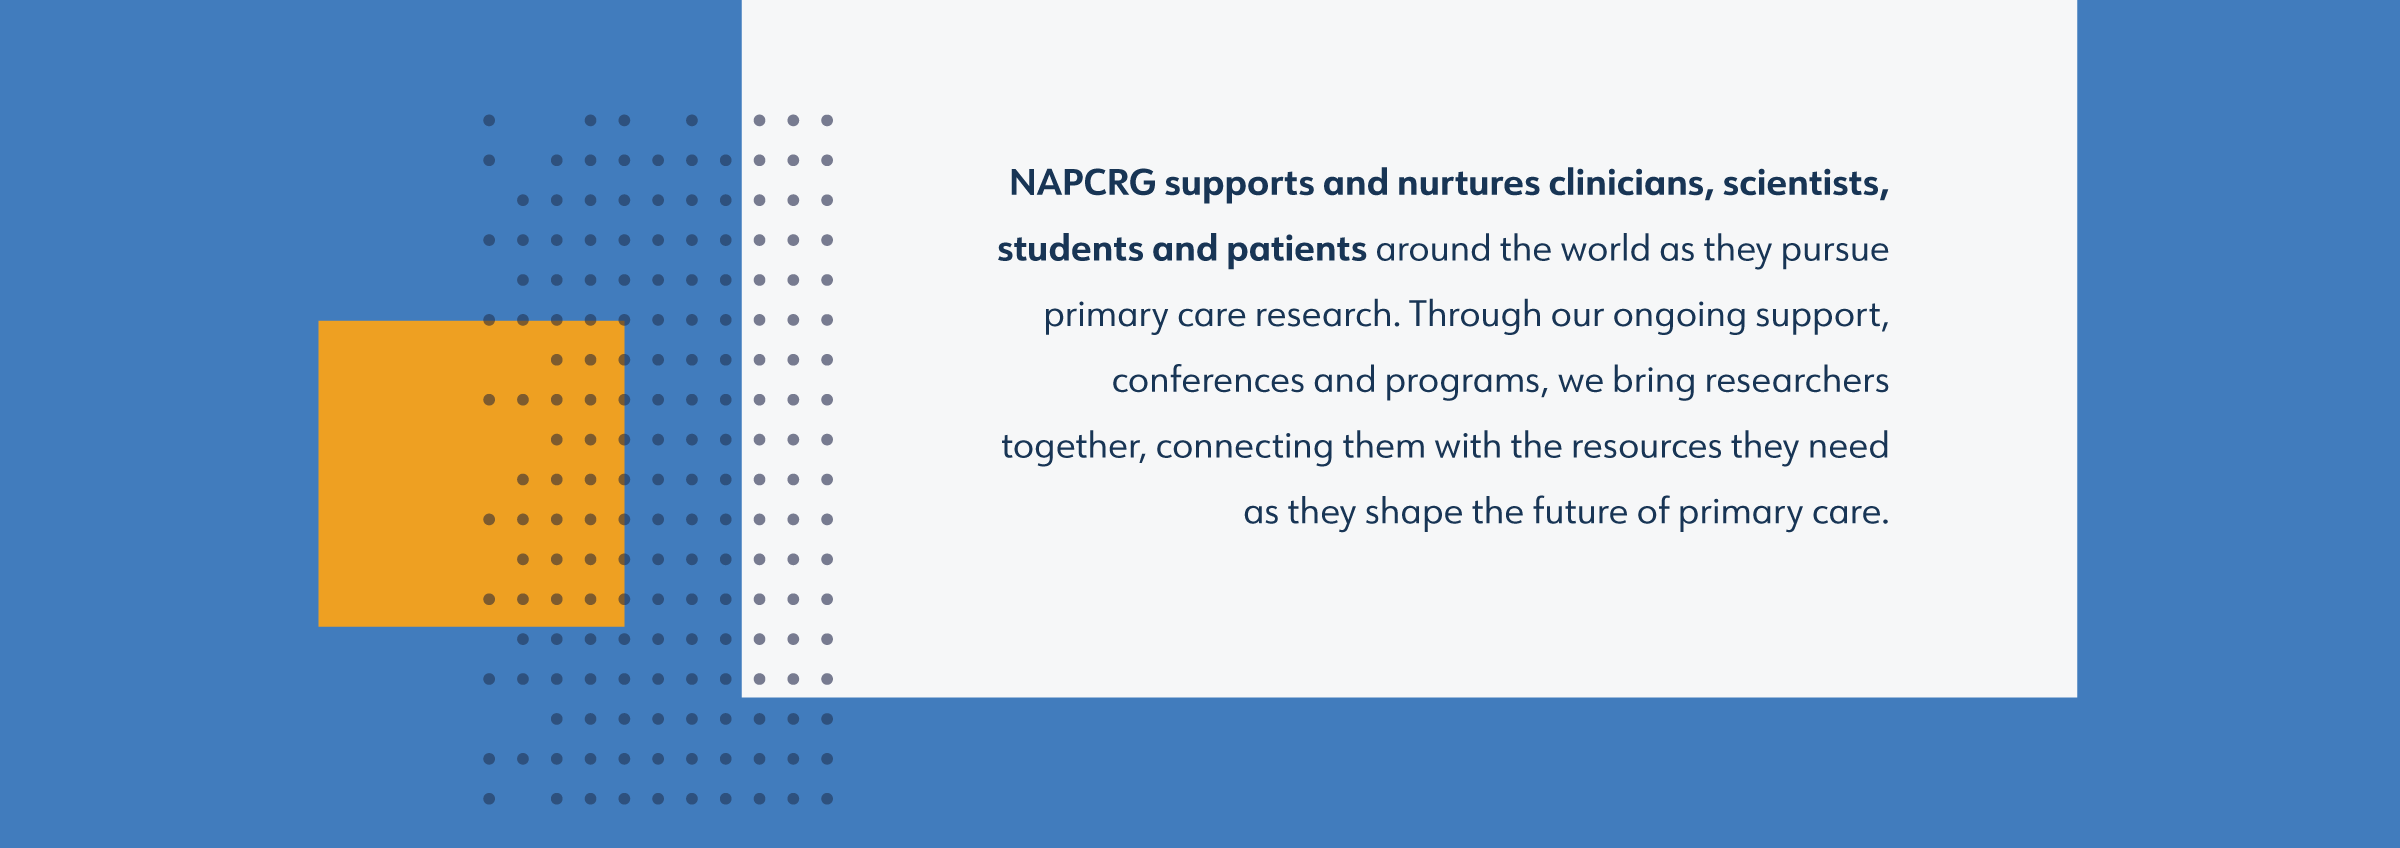 NAPCRG brand language statements: NAPCRG supports and nurtures clinicians, scientists, students and patients around the world as they pursue primary care research. Through our ongoing support, conferences and programs, we bring researchers together, connecting them with the resources they need as they shape the future of primary care.